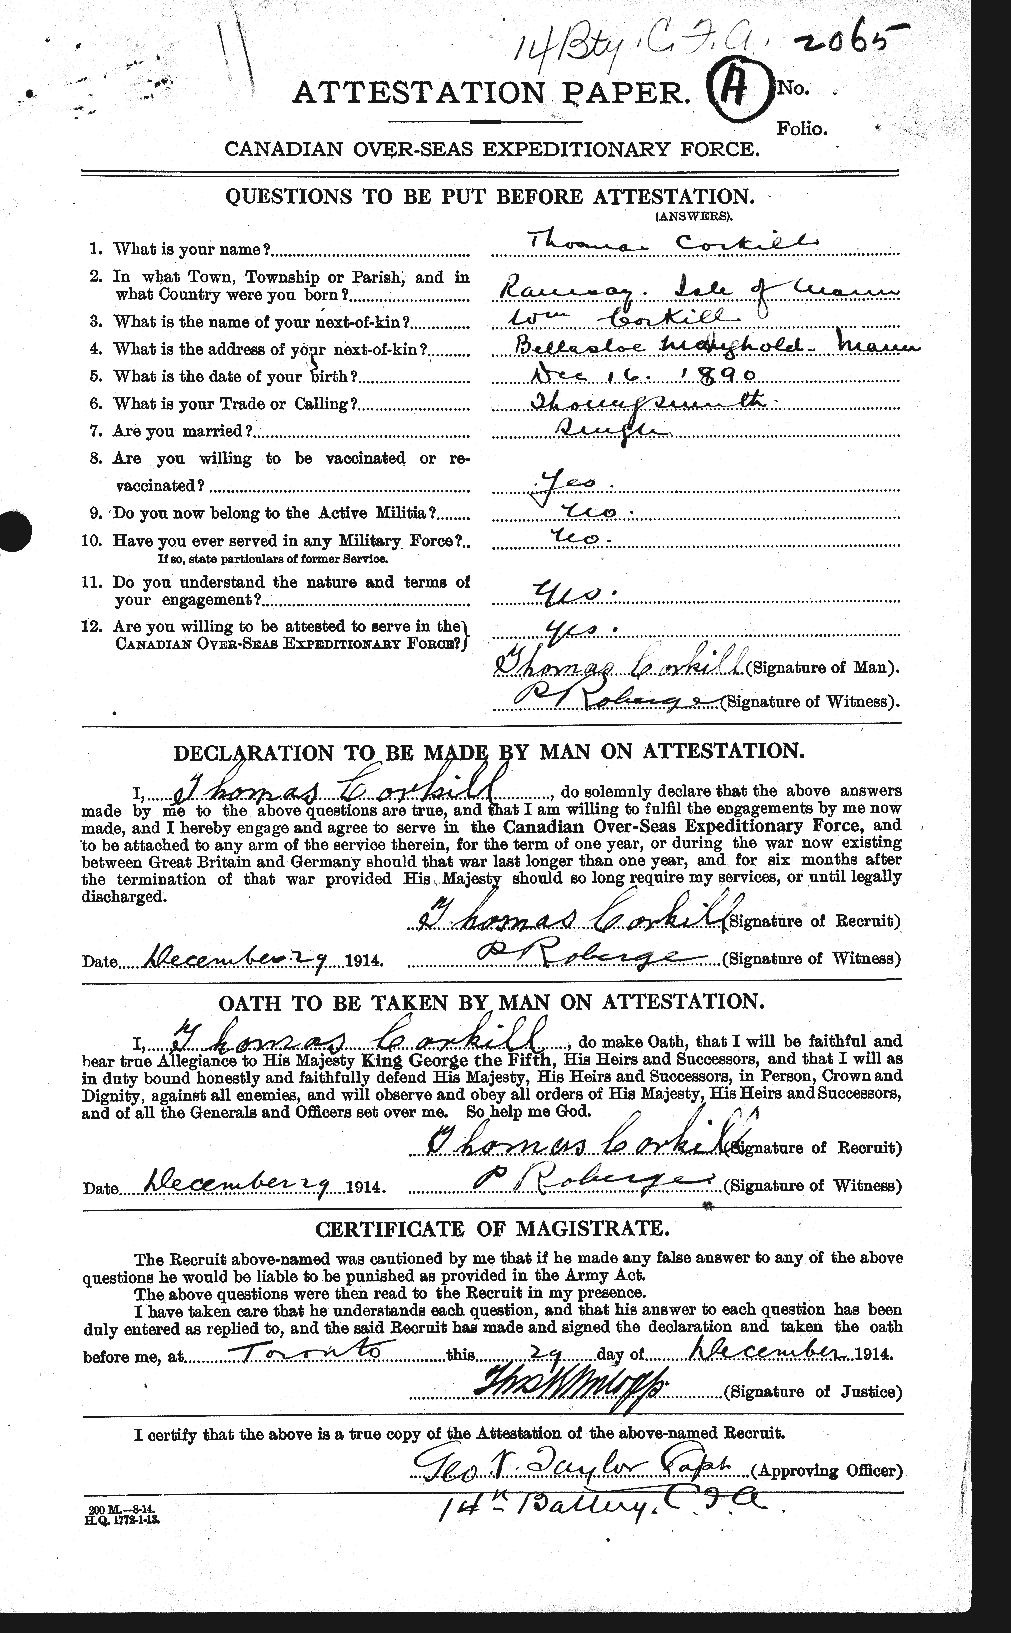 Personnel Records of the First World War - CEF 057634a